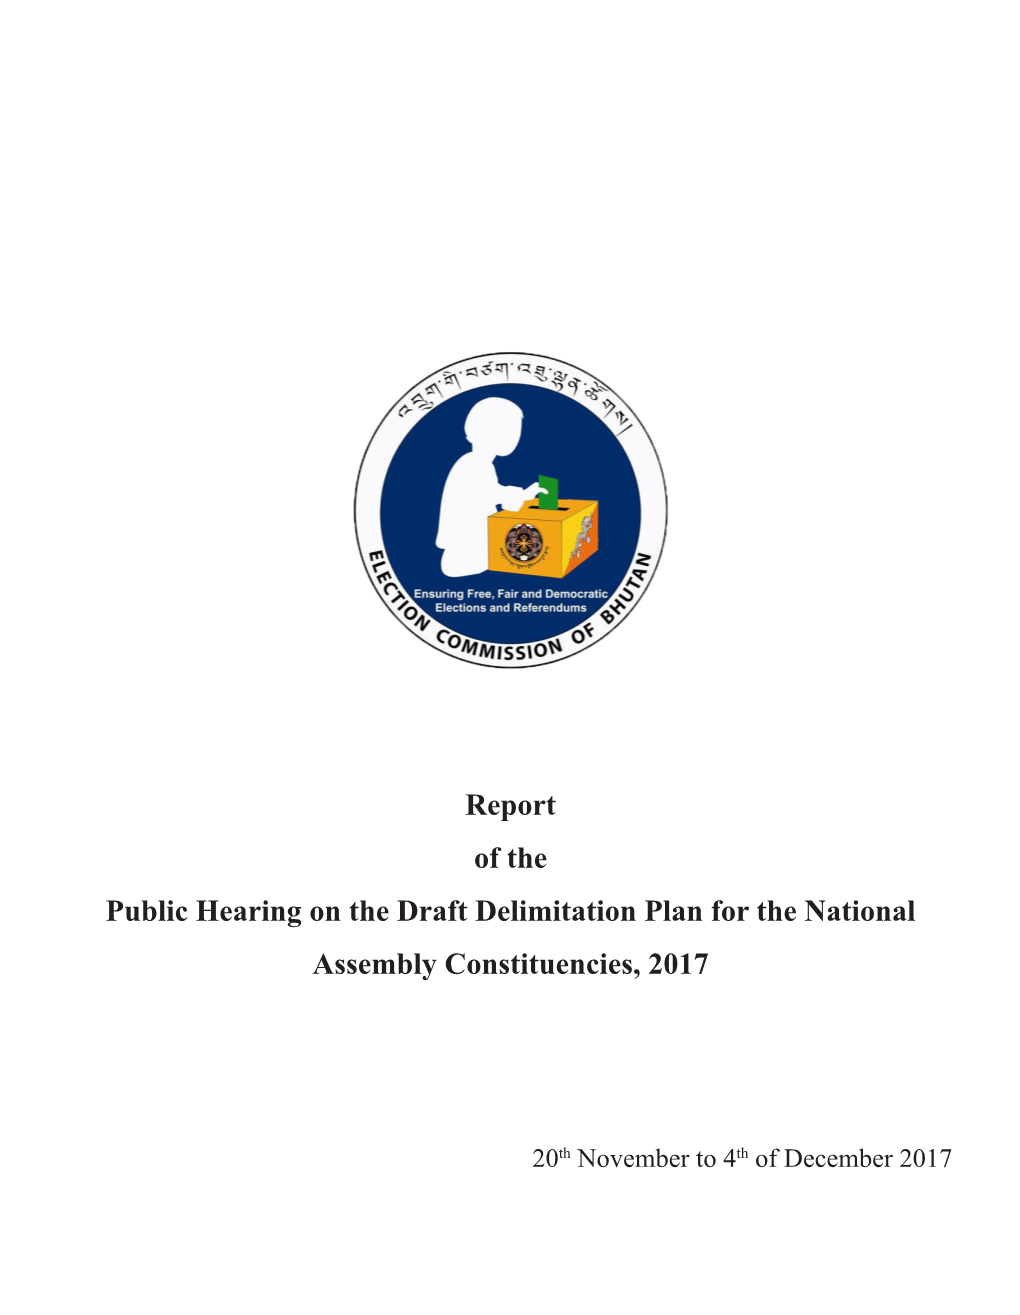 Report of the Public Hearing on the Draft Delimitation Plan for the National Assembly Constituencies, 2017